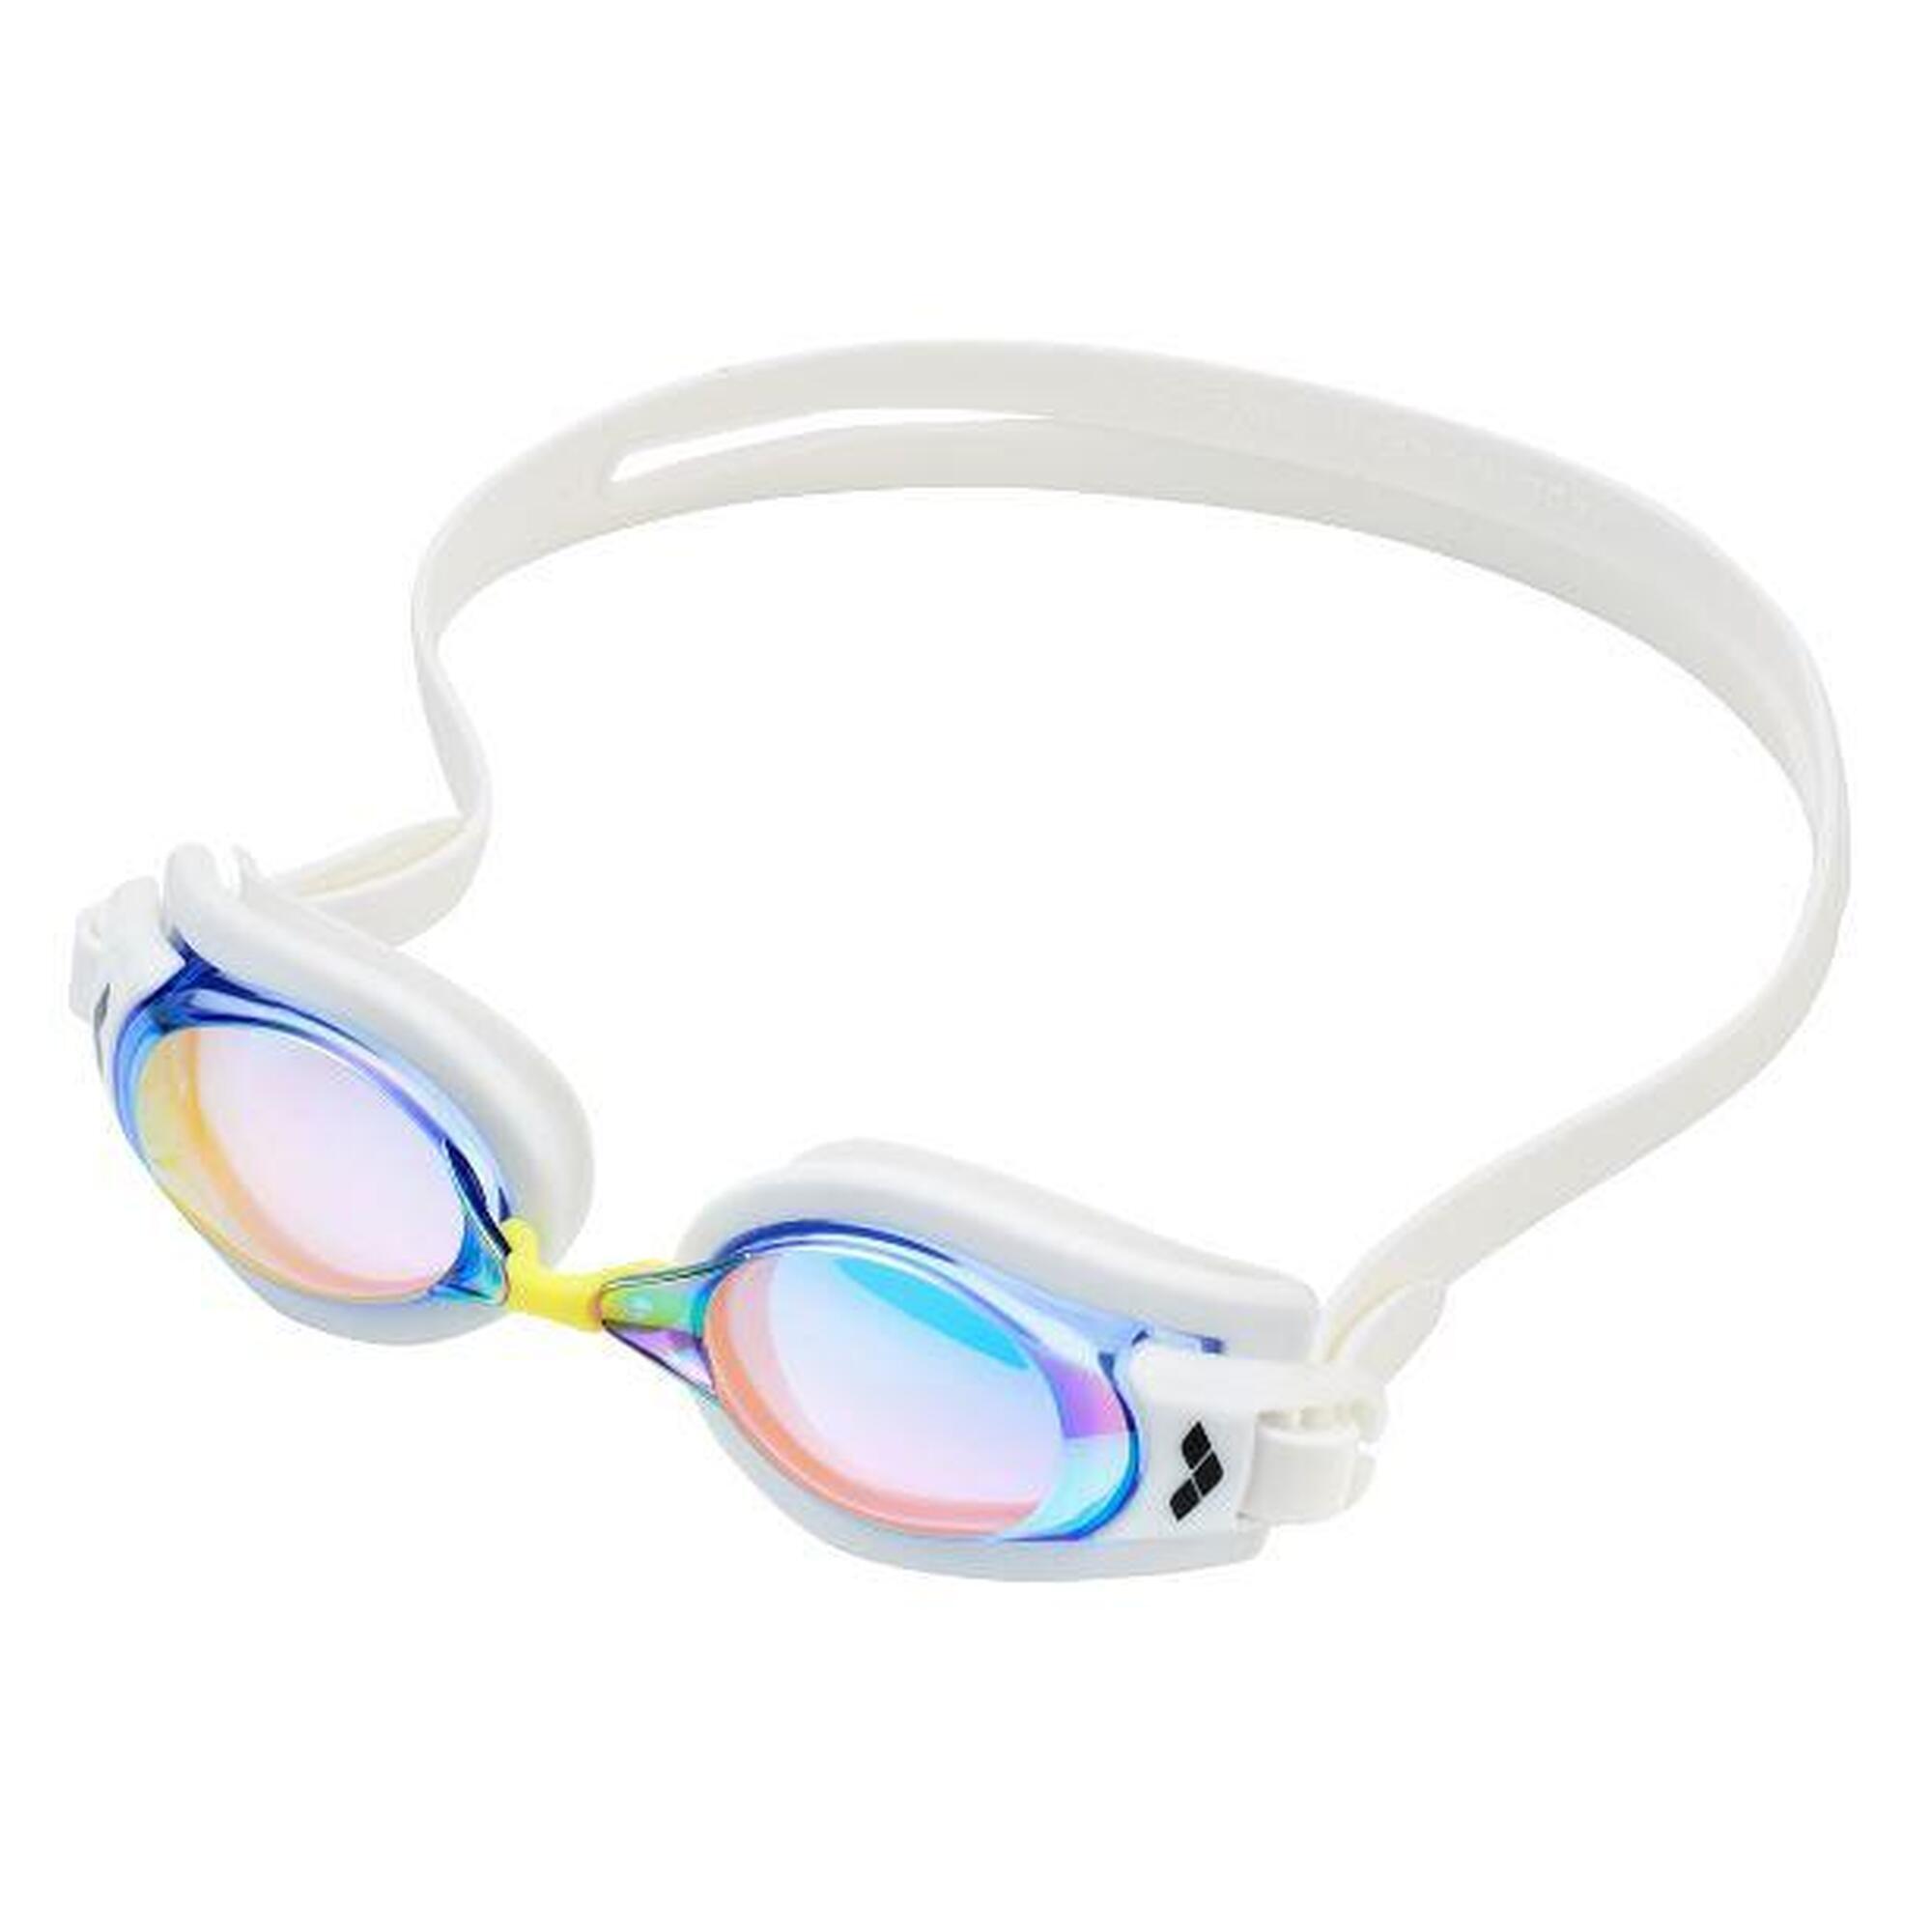 JAPAN MADE RE:NON 700 DIOPTERS OPTICAL MIRROR GOGGLE - WHITE